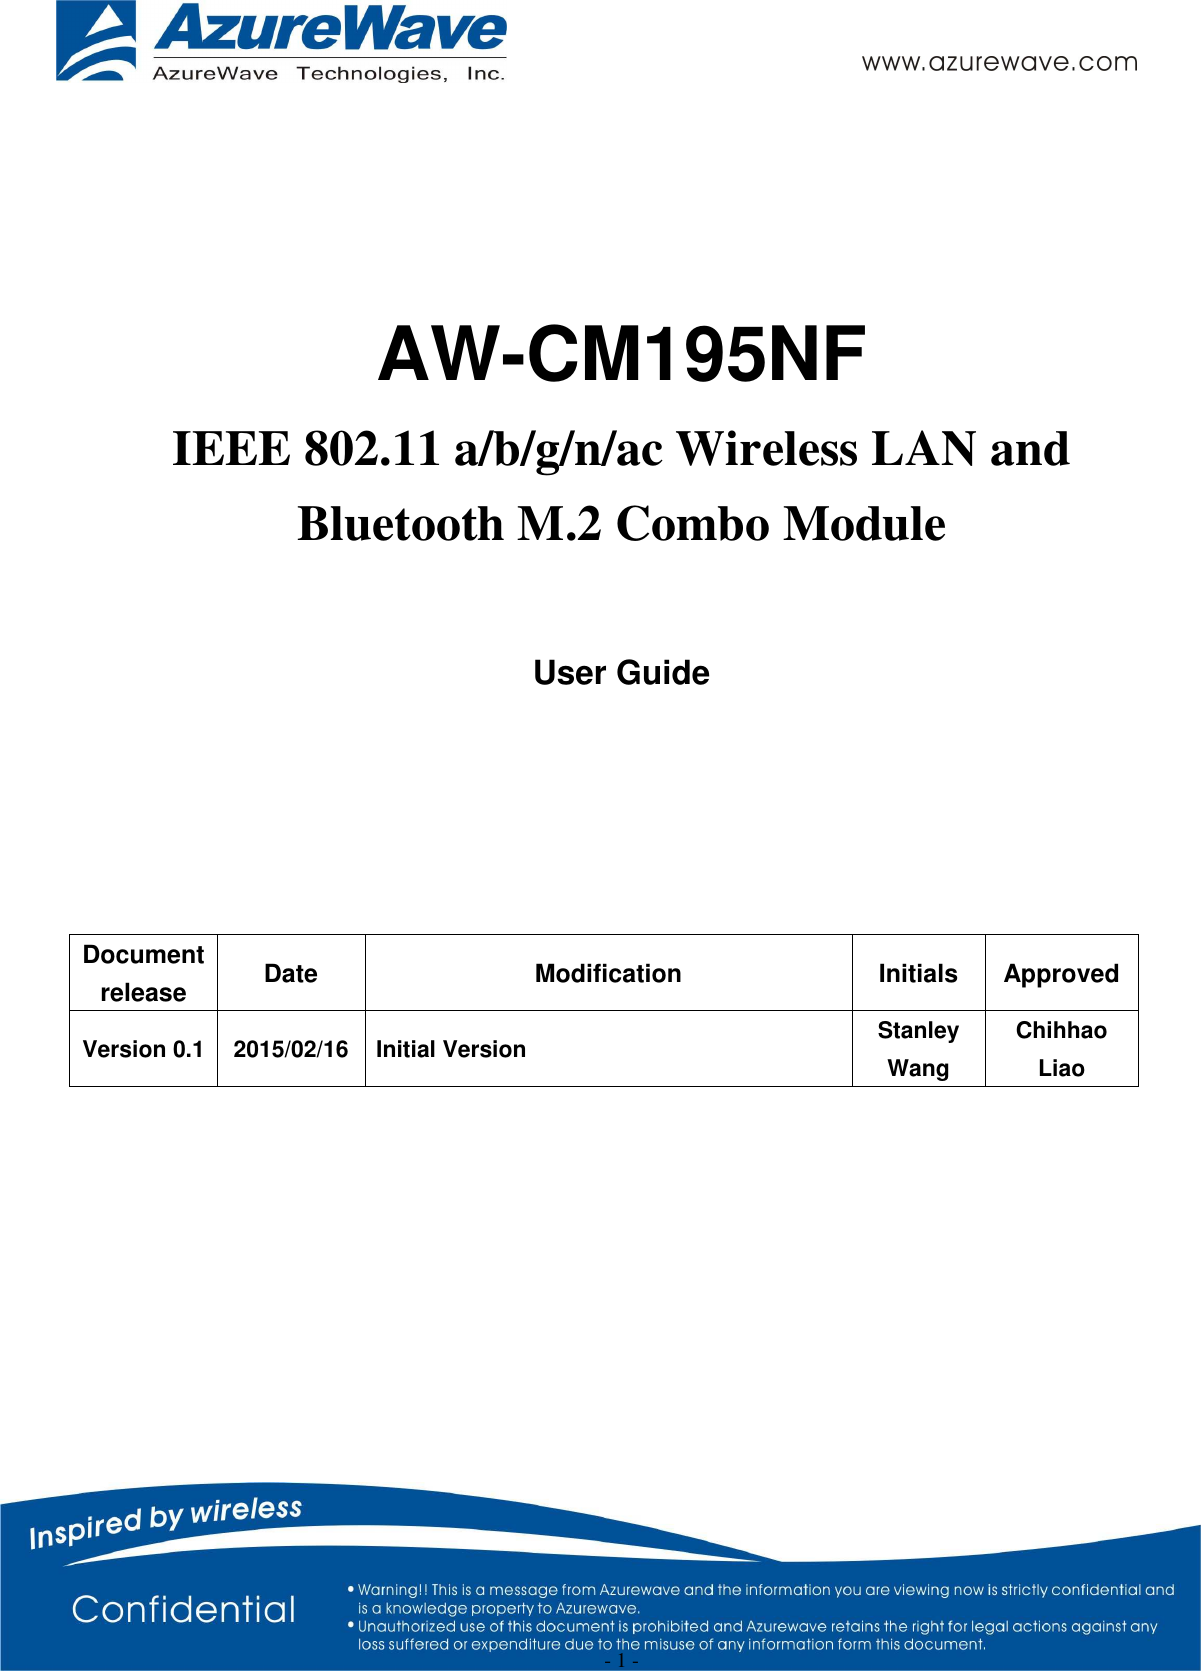  - 1 -   AW-CM195NF IEEE 802.11 a/b/g/n/ac Wireless LAN and Bluetooth M.2 Combo Module  User Guide    Document release  Date  Modification  Initials  Approved Version 0.1 2015/02/16 Initial Version  Stanley Wang Chihhao Liao 